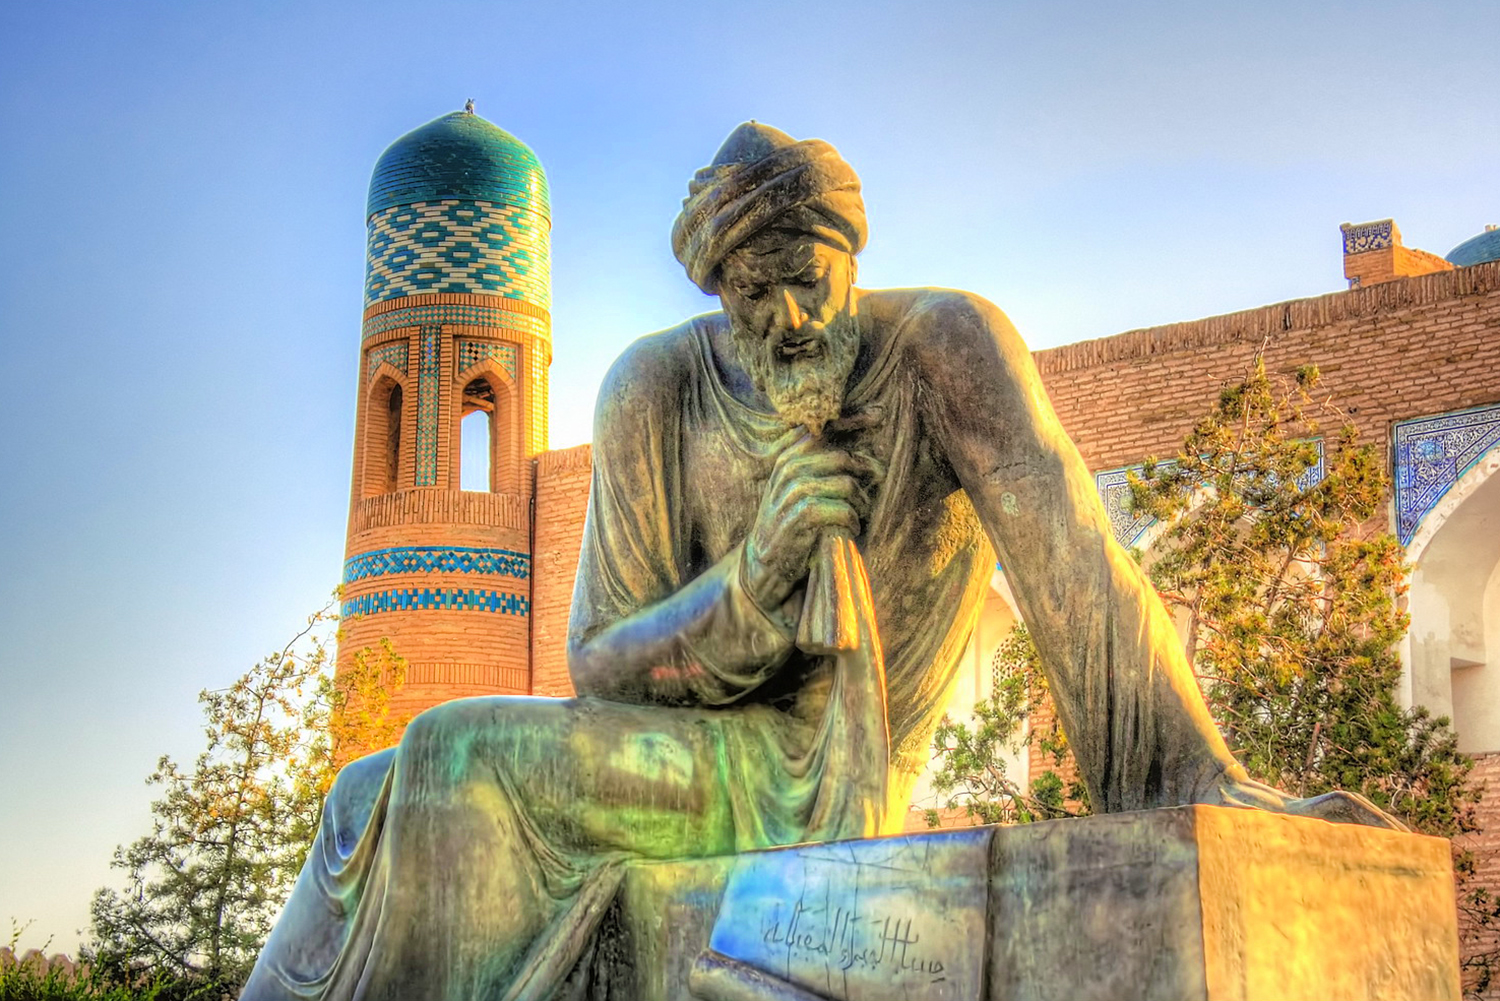 A photo of a bronze statue of Al-Khwarizmi, a Persian mathematician and astronomer, sitting with his head resting on his hand, in front of a blue-tiled tower at sunset.